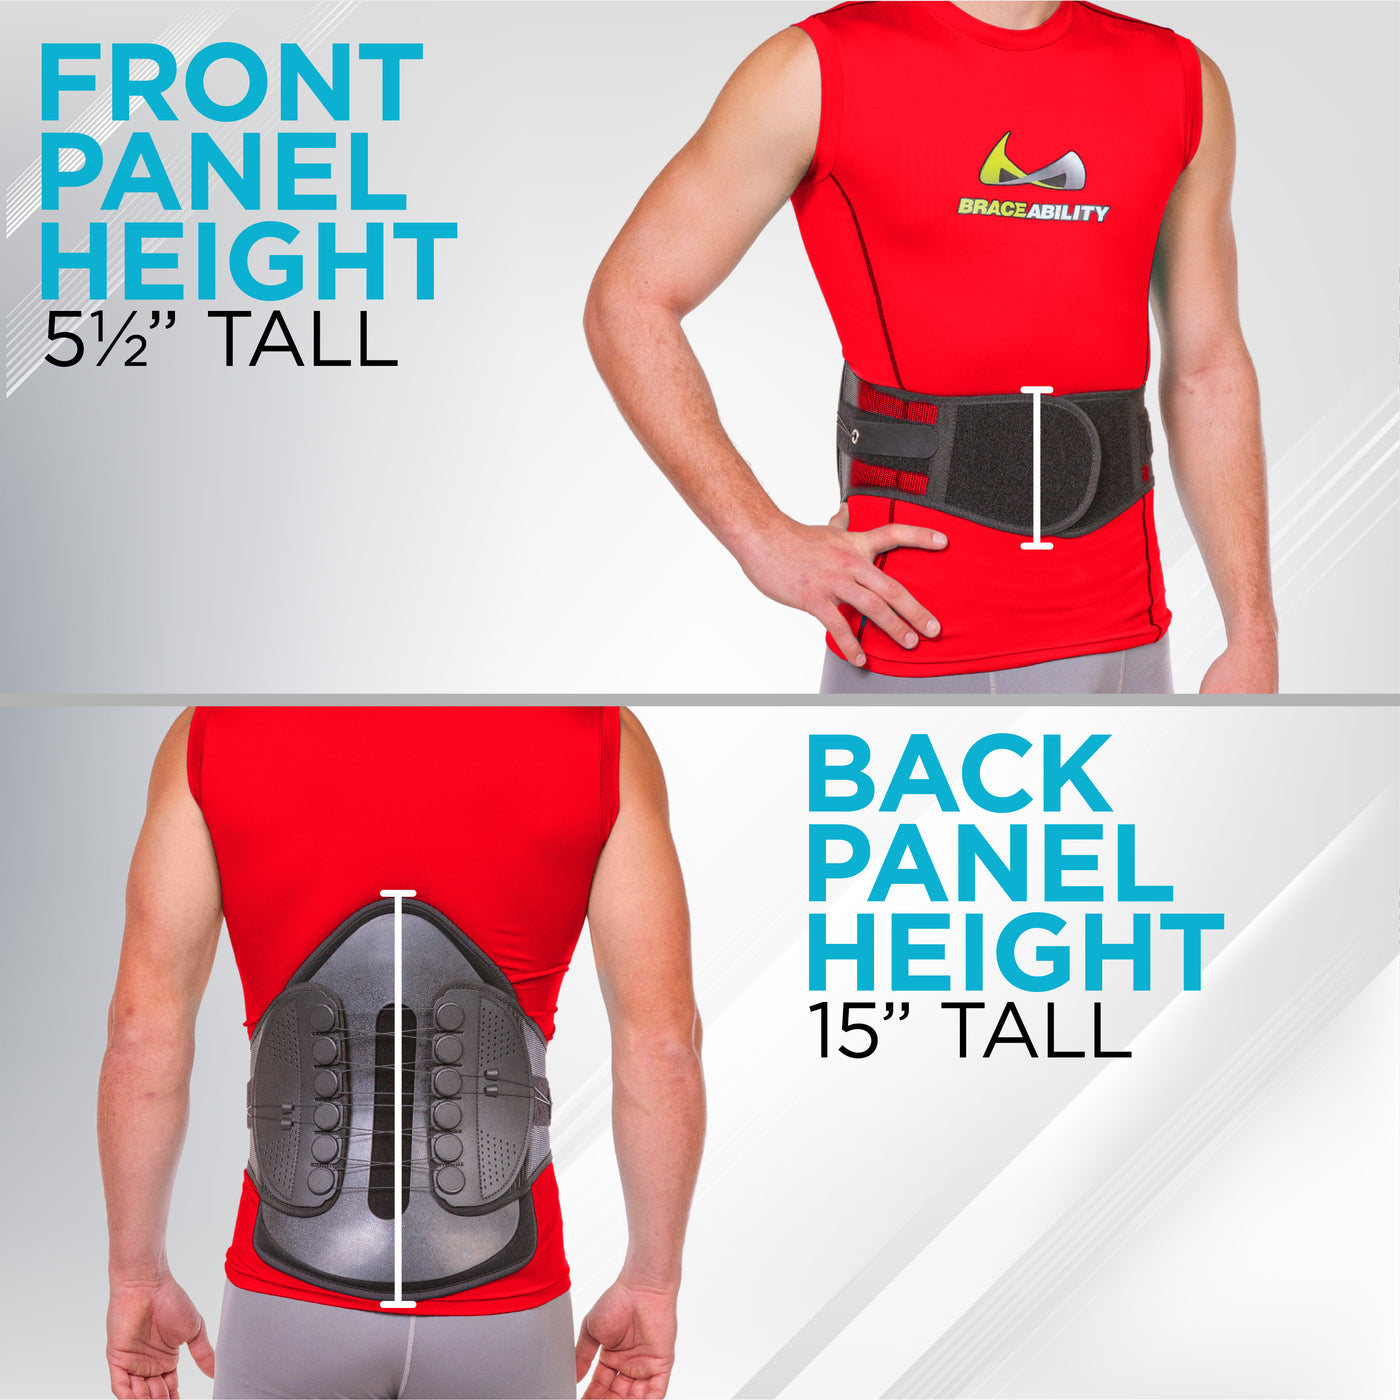 at fifteen inches tall, the lordosis back brace stabilizes the entire lower back